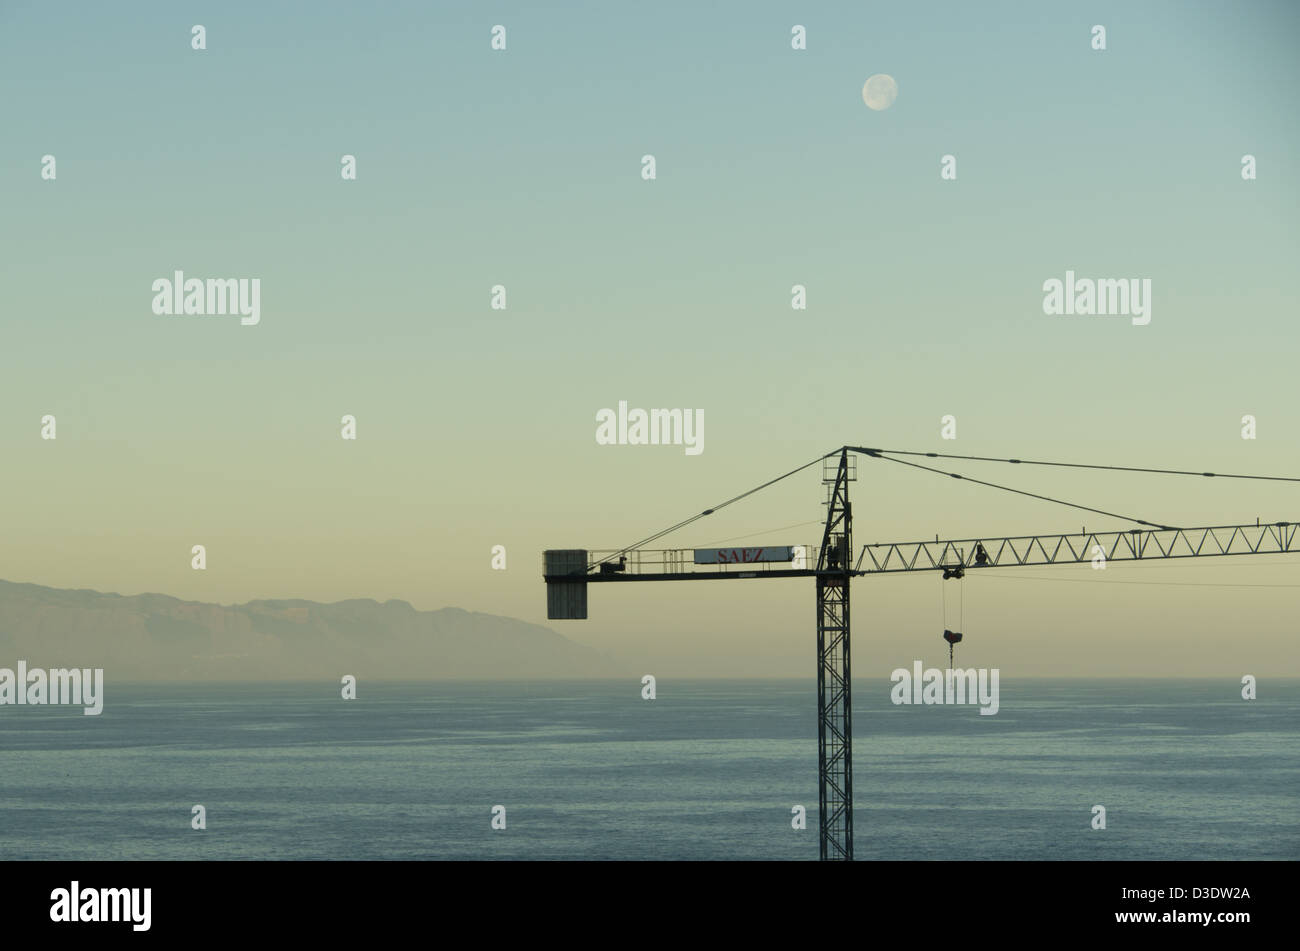 Construction crane and moon, with strait between La Gomera and Tenerife in the background Stock Photo